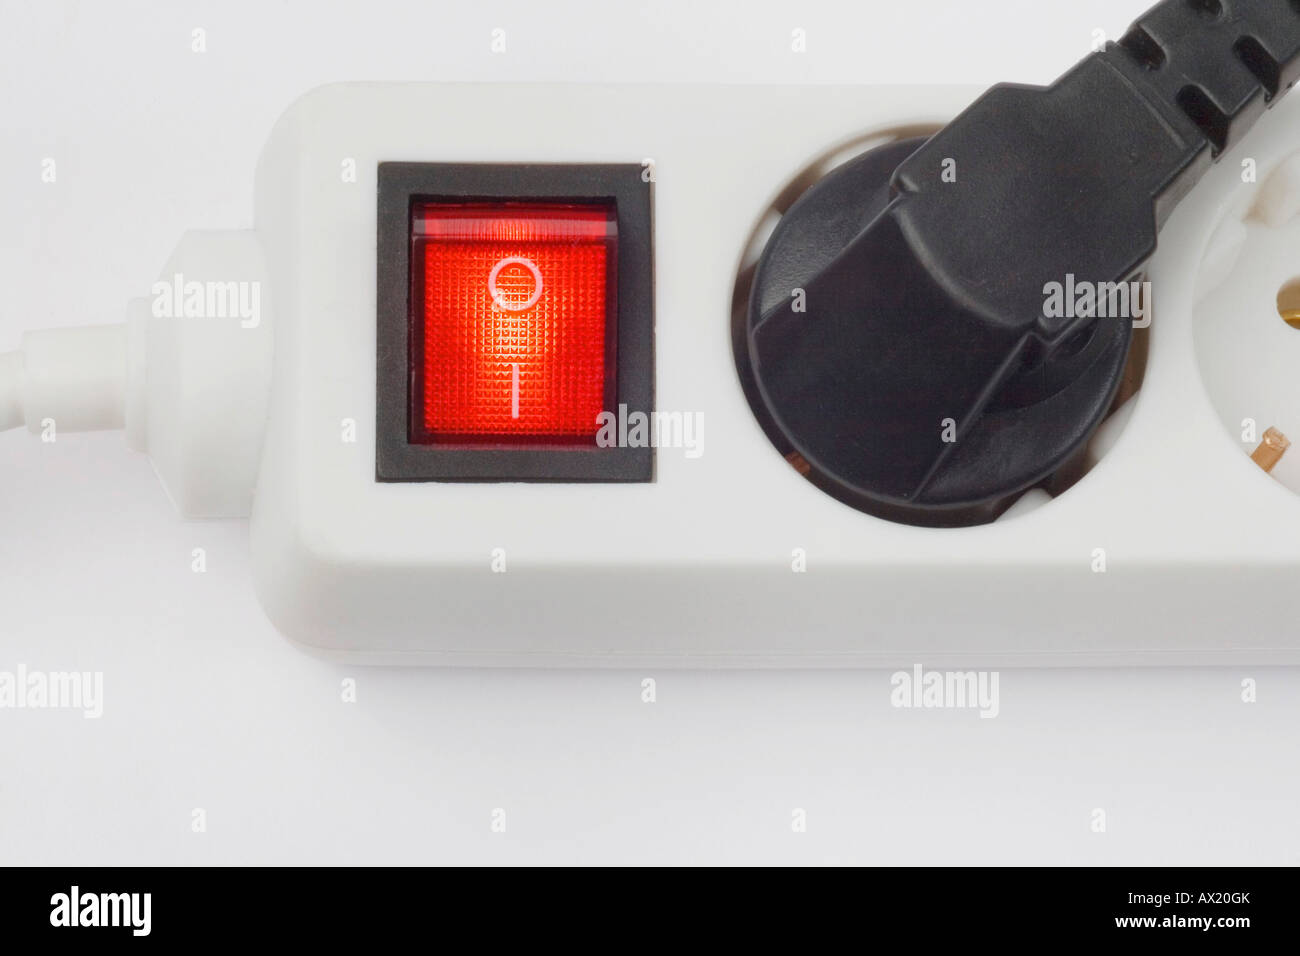 Multiple outlet socket, on/off switch glowing red Stock Photo